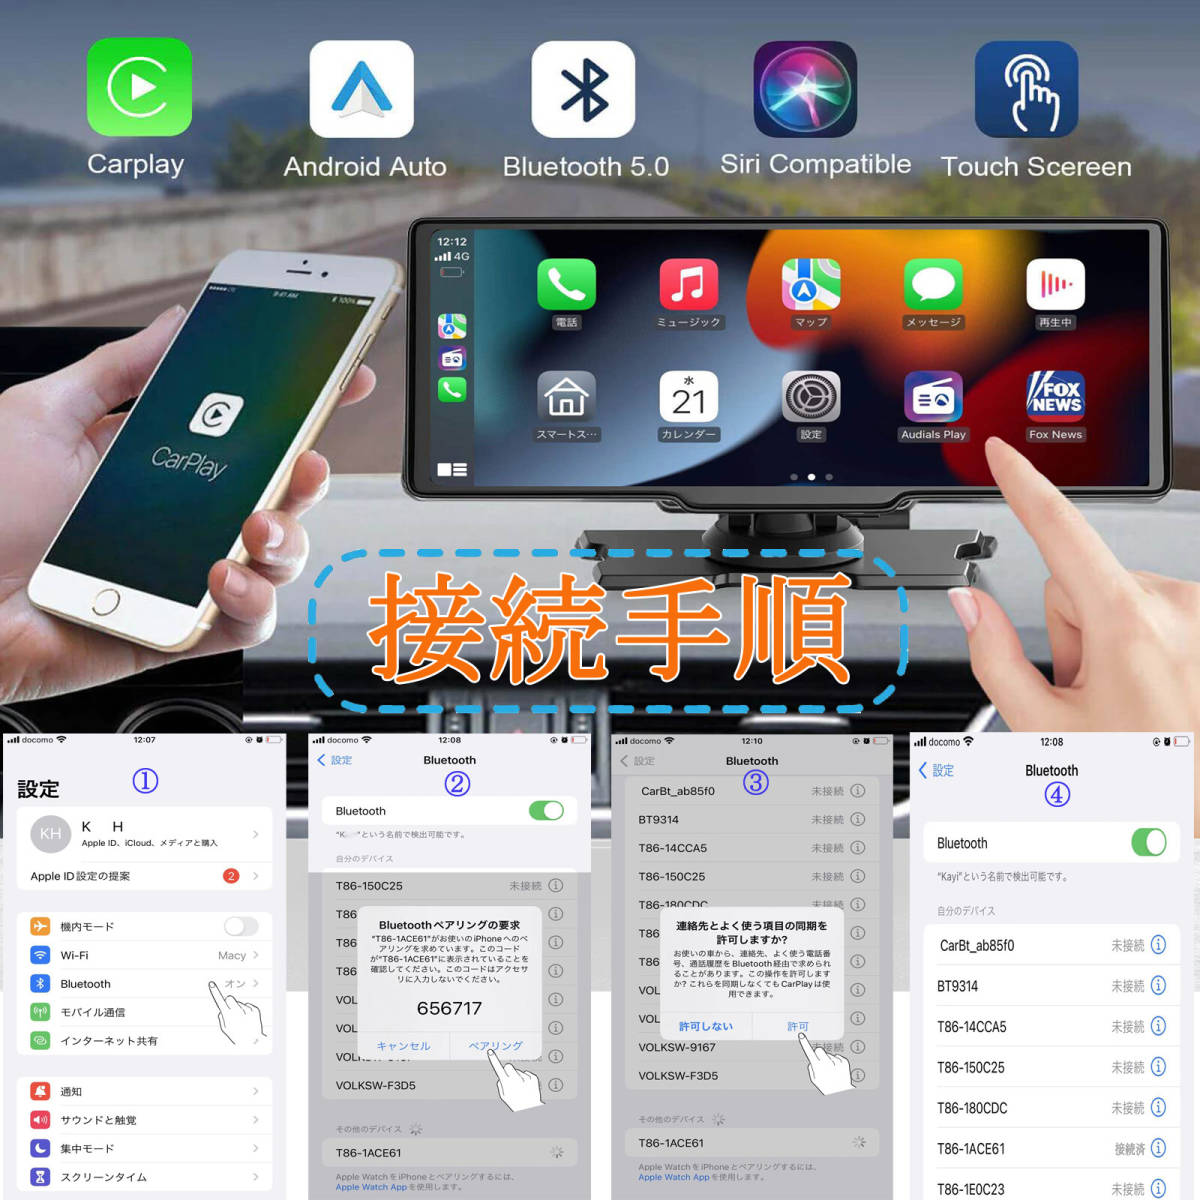 10.26 type CarPlay on dash monitor drive recorder front monitor car navigation system rom and rear (before and after) same time video recording 